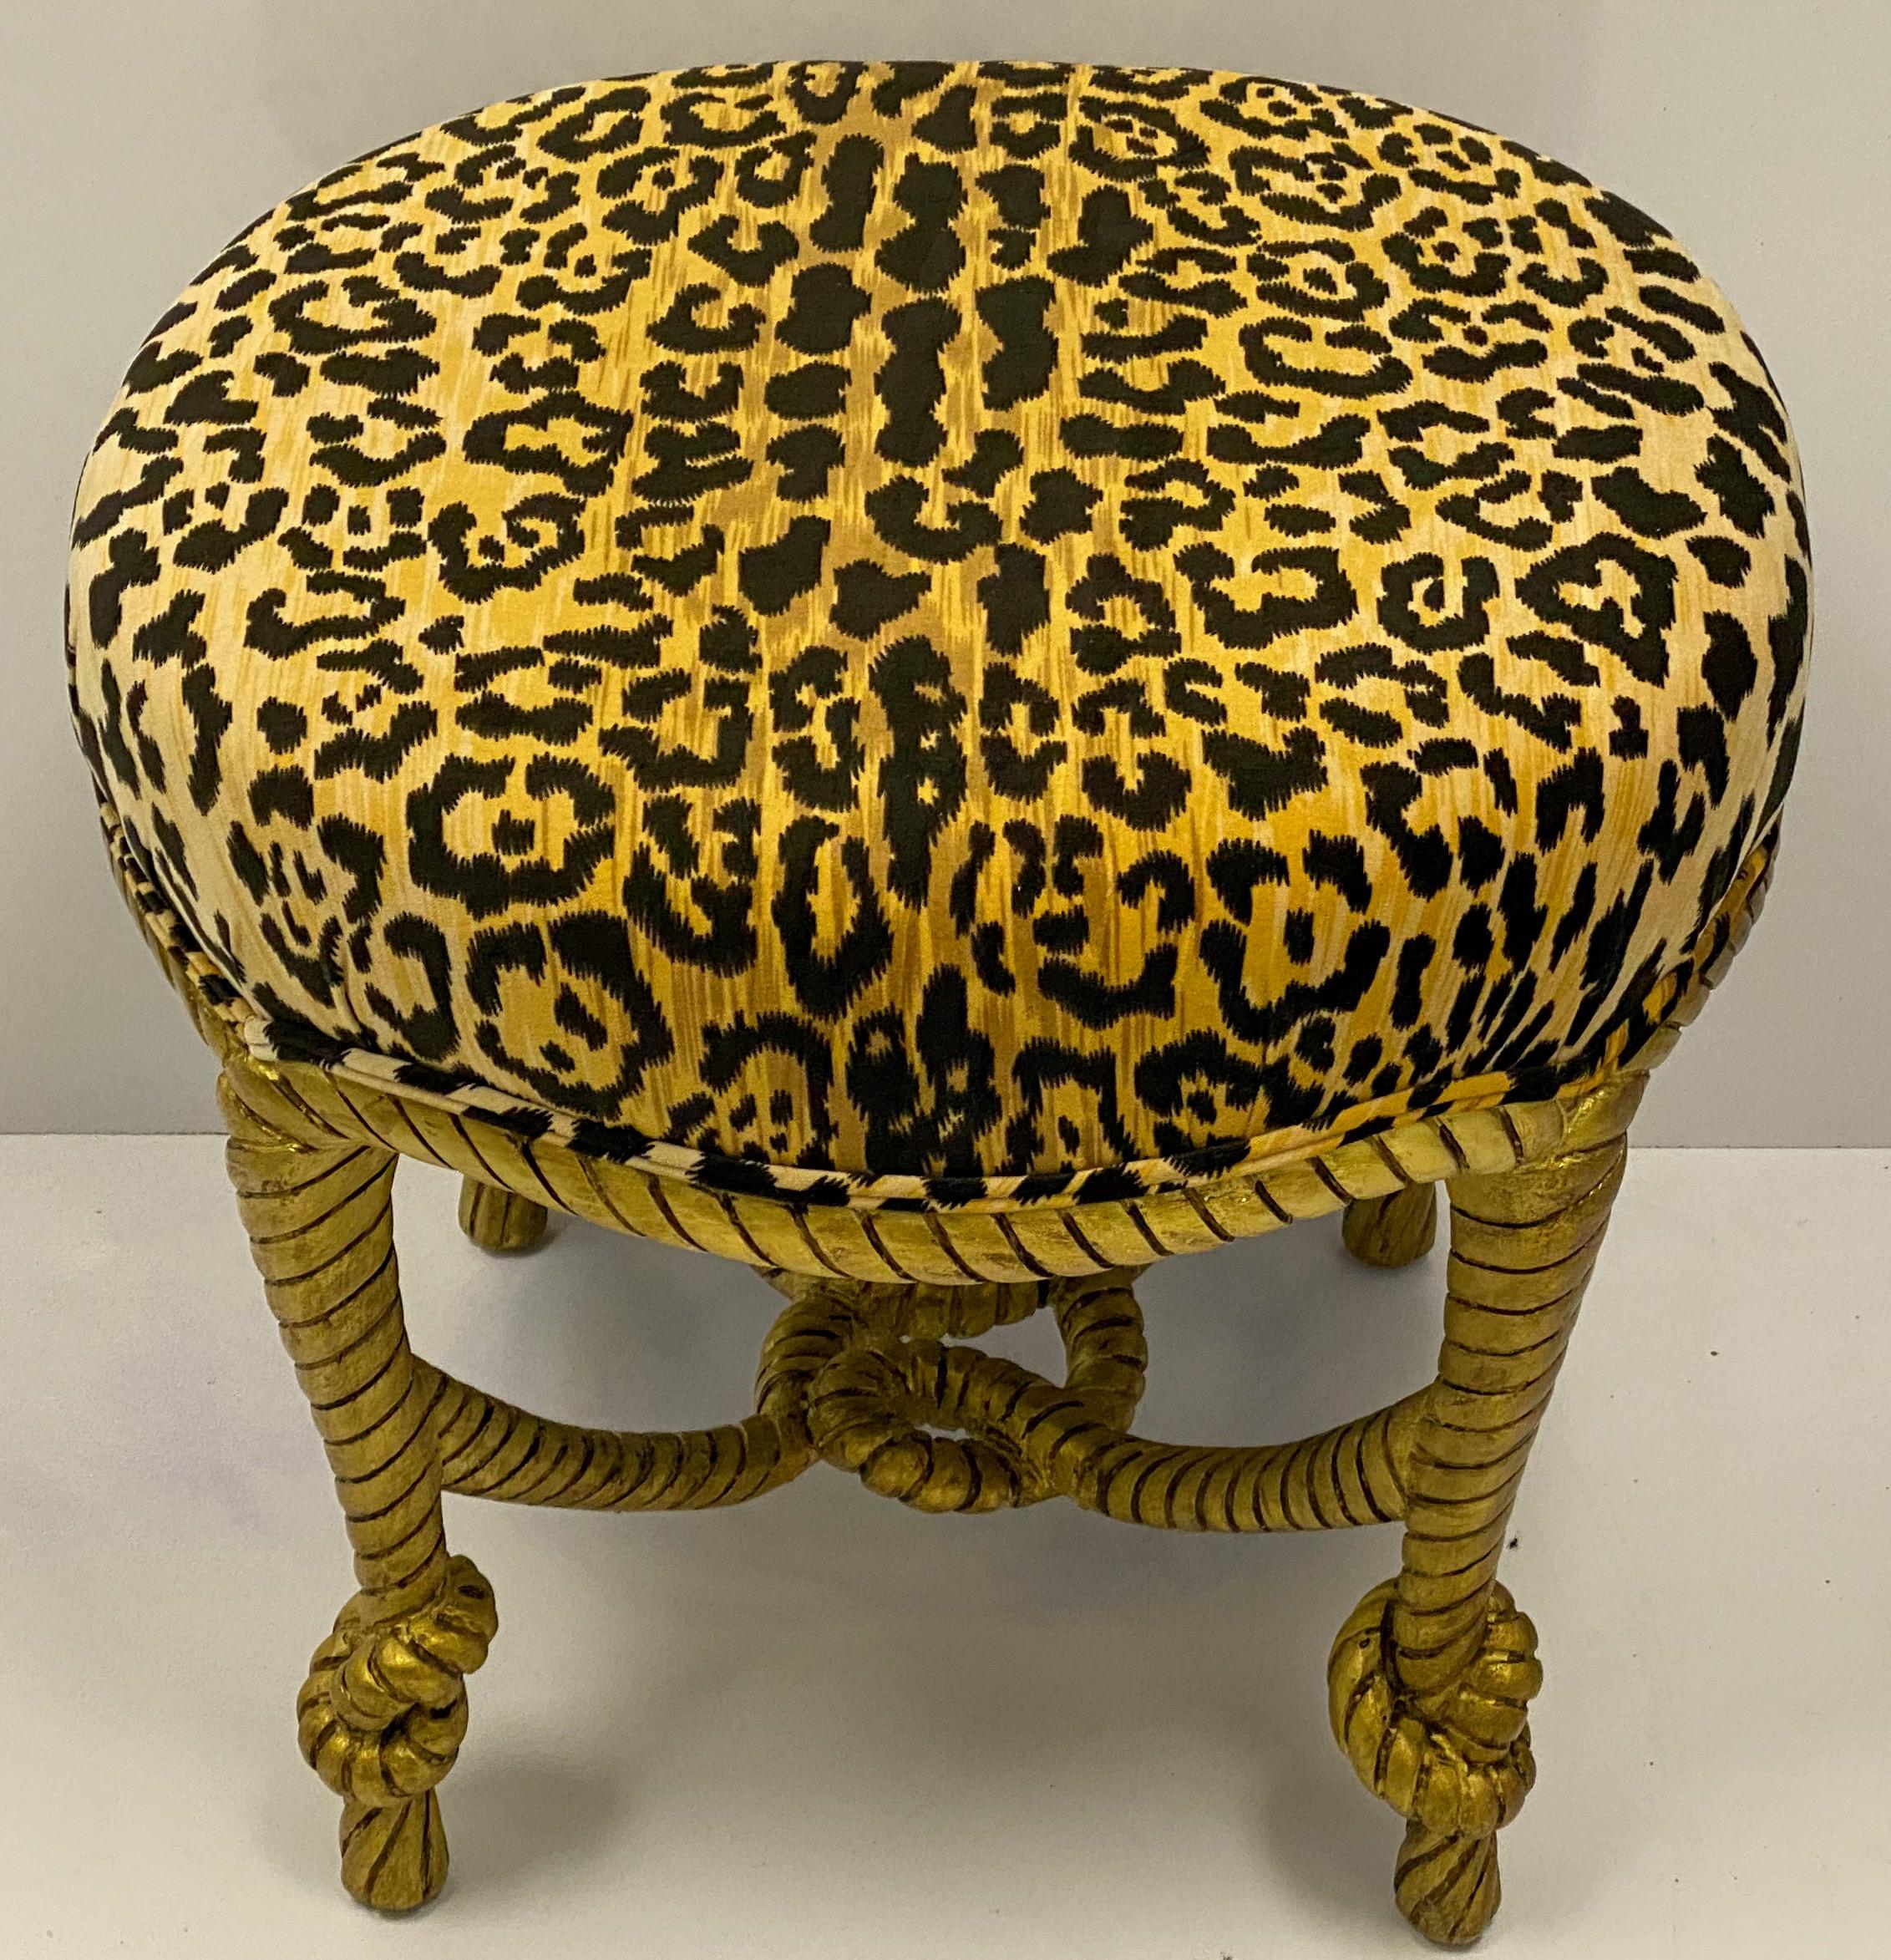 Leopard velvet and giltwood! It doesn’t get much better than this! These Napoleon III style stools have been newly upholstered in a leopard velvet. The rope and tassel frames have a gilt painted finish.